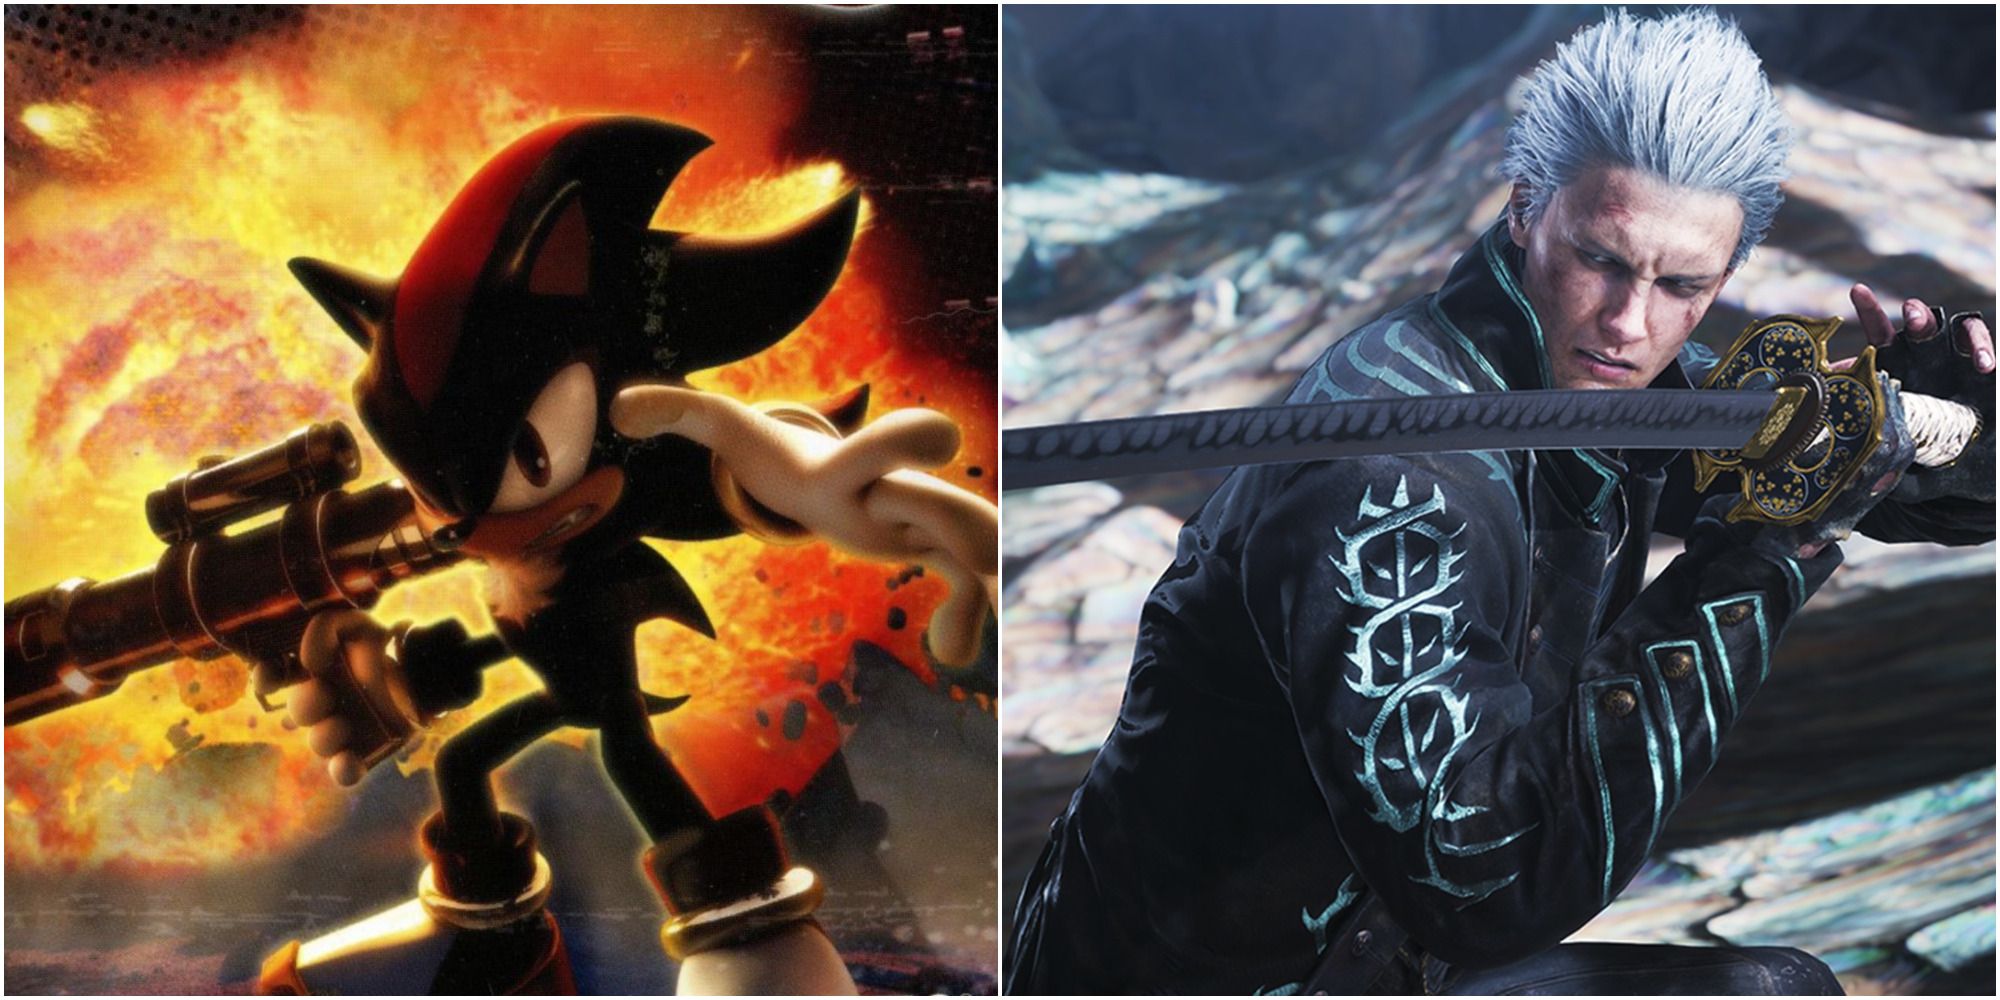 Shadow the Hedgehog and Vergil from Devil May Cry 5